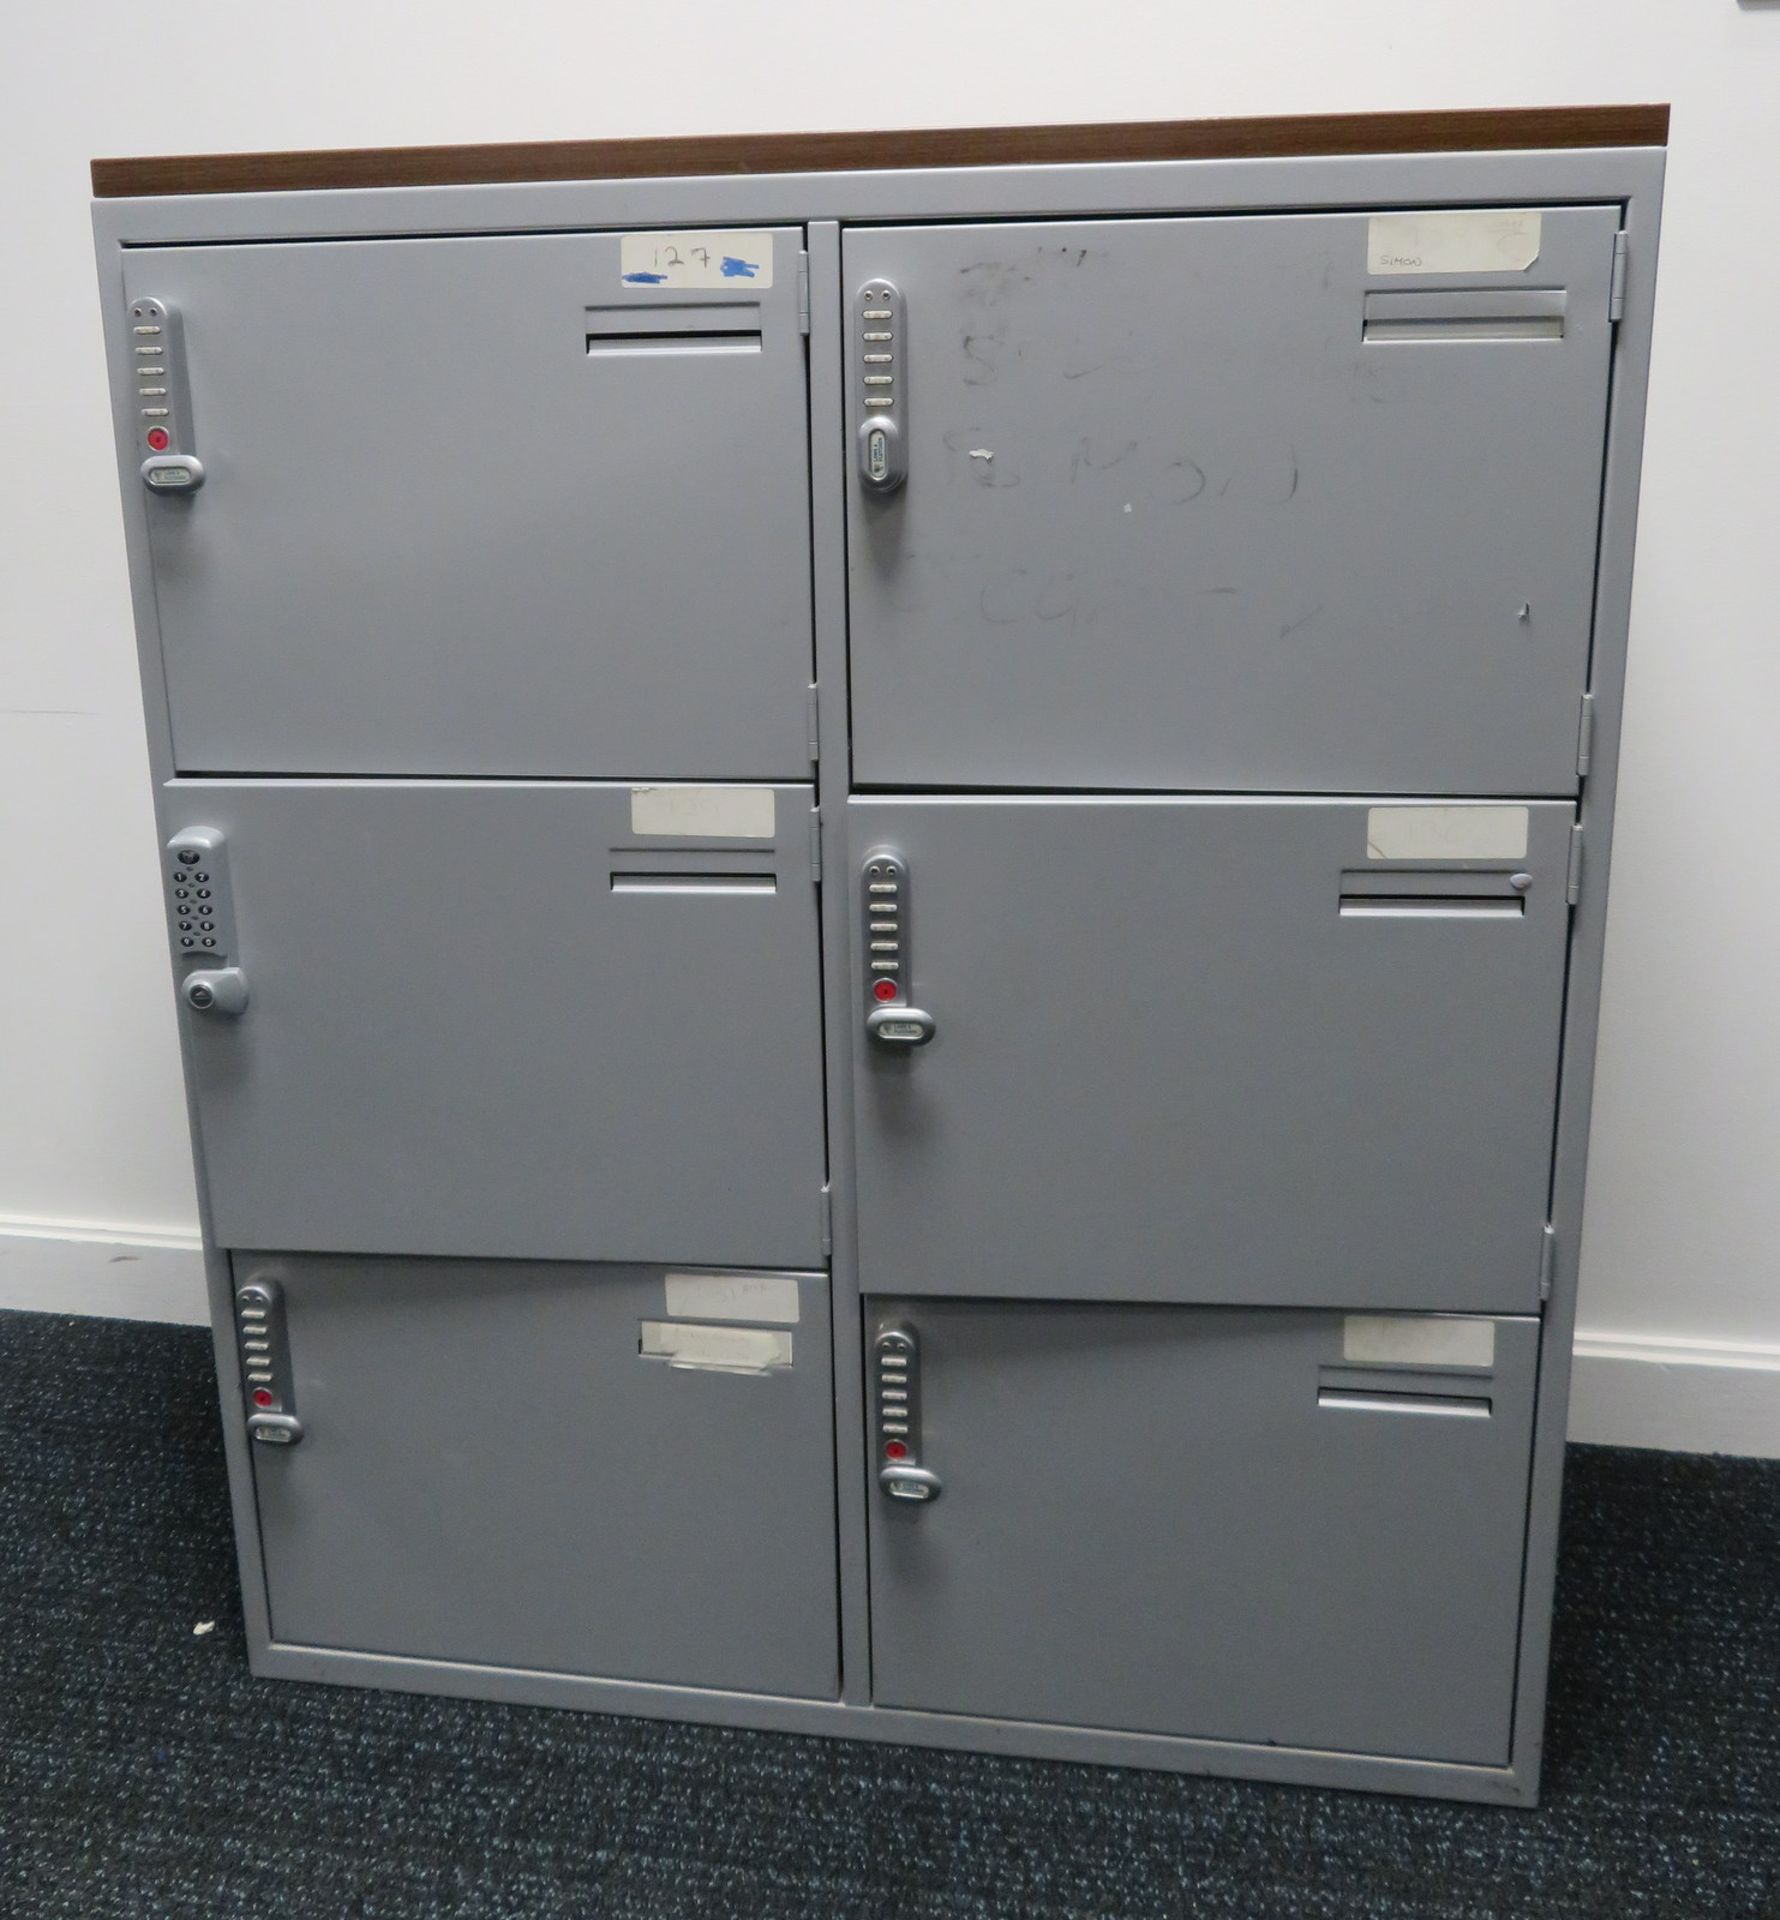 Bank Of 6 Lockers. This Is An Overview Picture And You Will Receive One In Similar Condition.